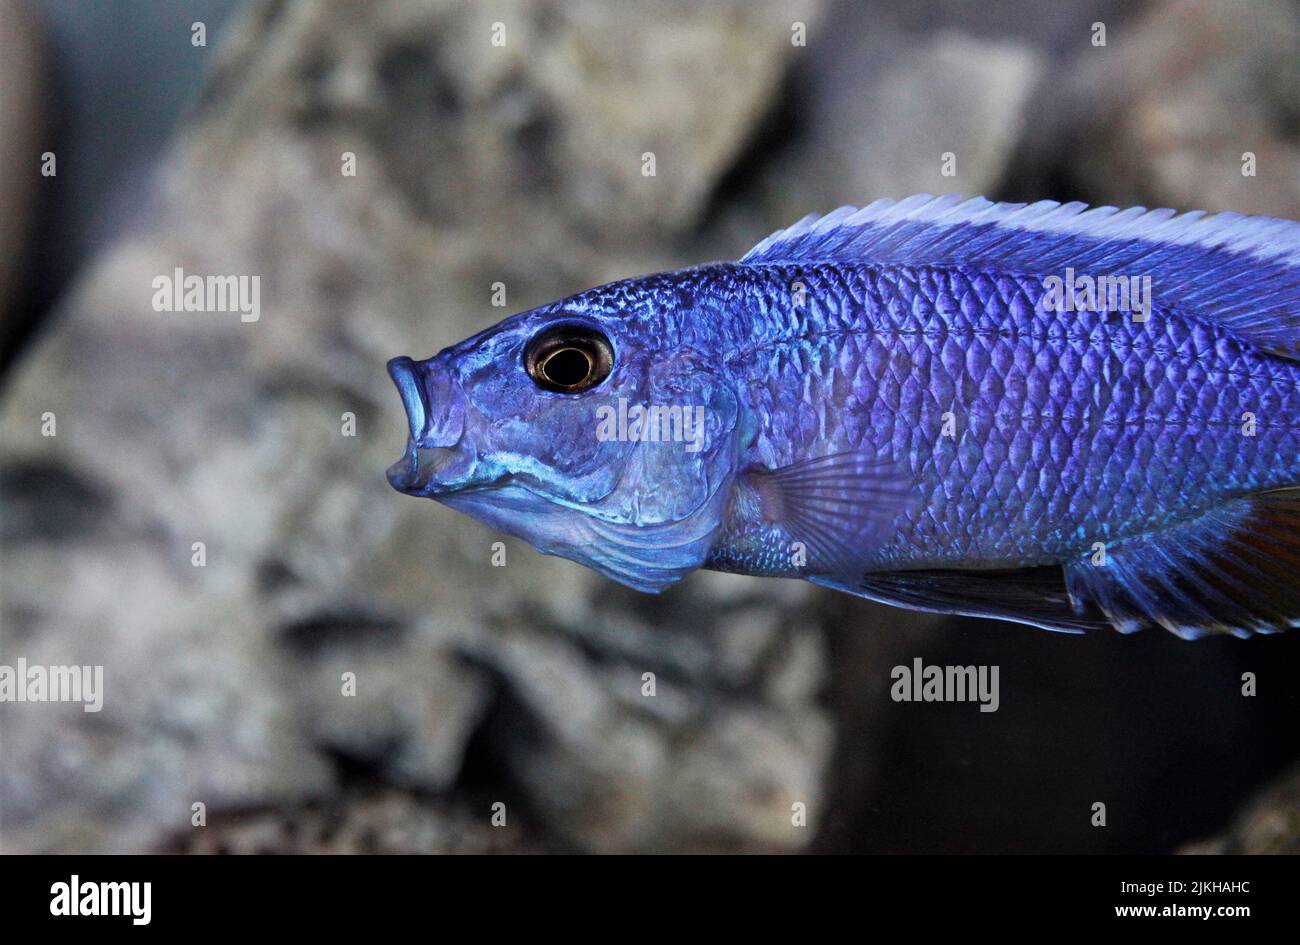 A closeup shot of an Electric blue hap in the water in a blurred background Stock Photo